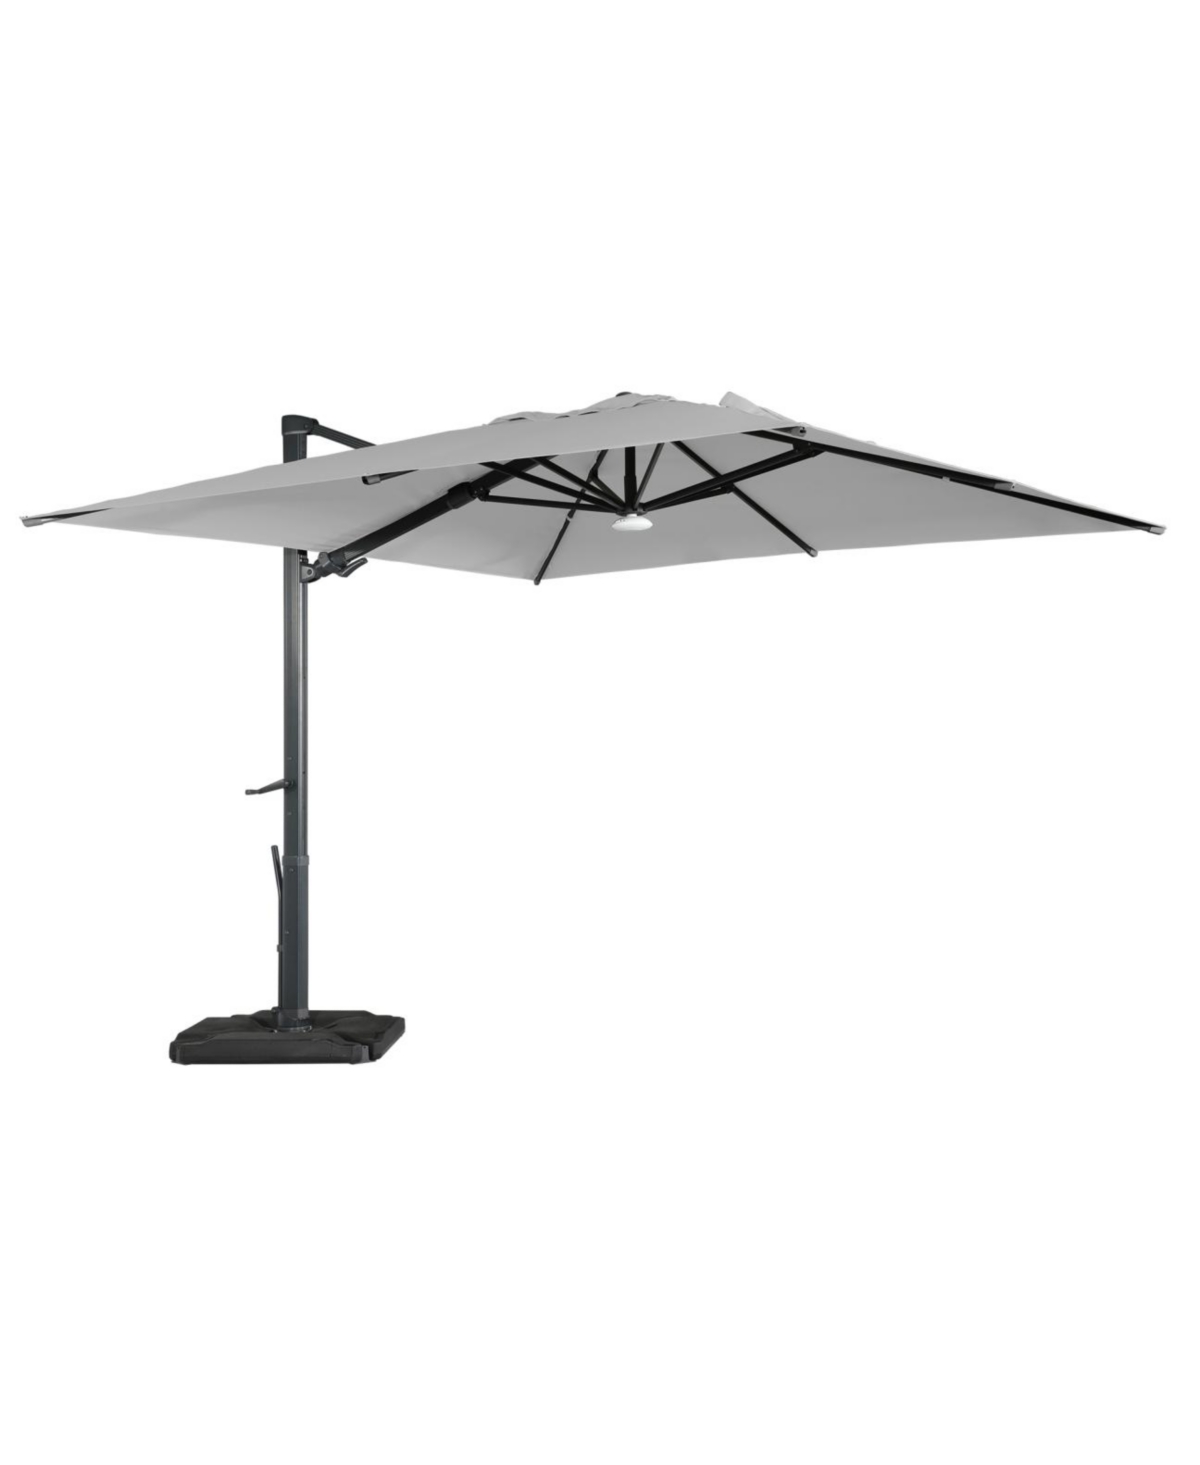 10ft Square Solar Led Cantilever Outdoor Patio Umbrella with Included Base Weight Stand & Bluetooth Light - Gray